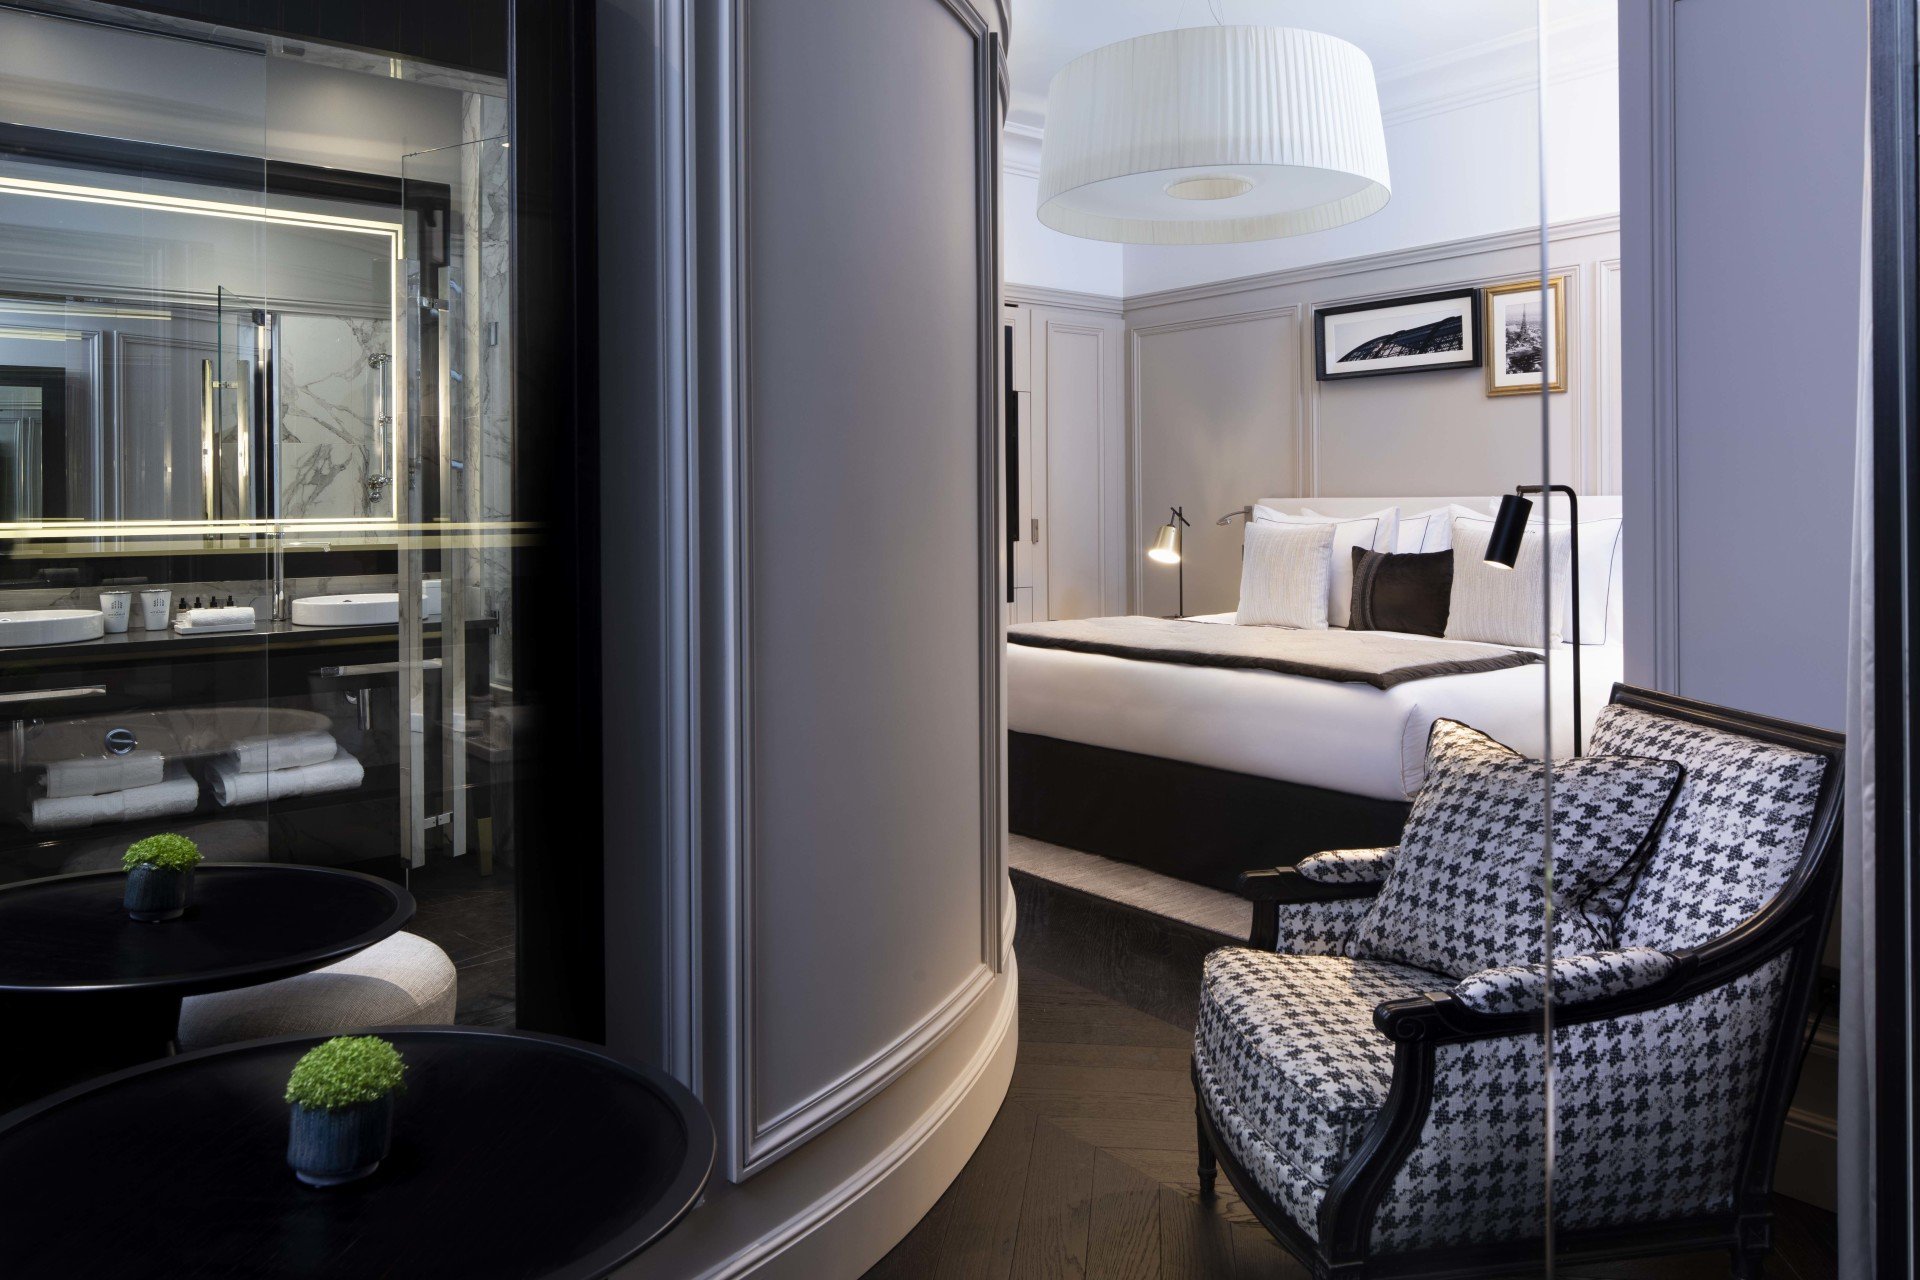 Hotel and Spa Le Damantin Paris - luxury hotel designed by the interior design studio jean-philippe nuel - design room equipped with bed, design armchair, modern bathroom